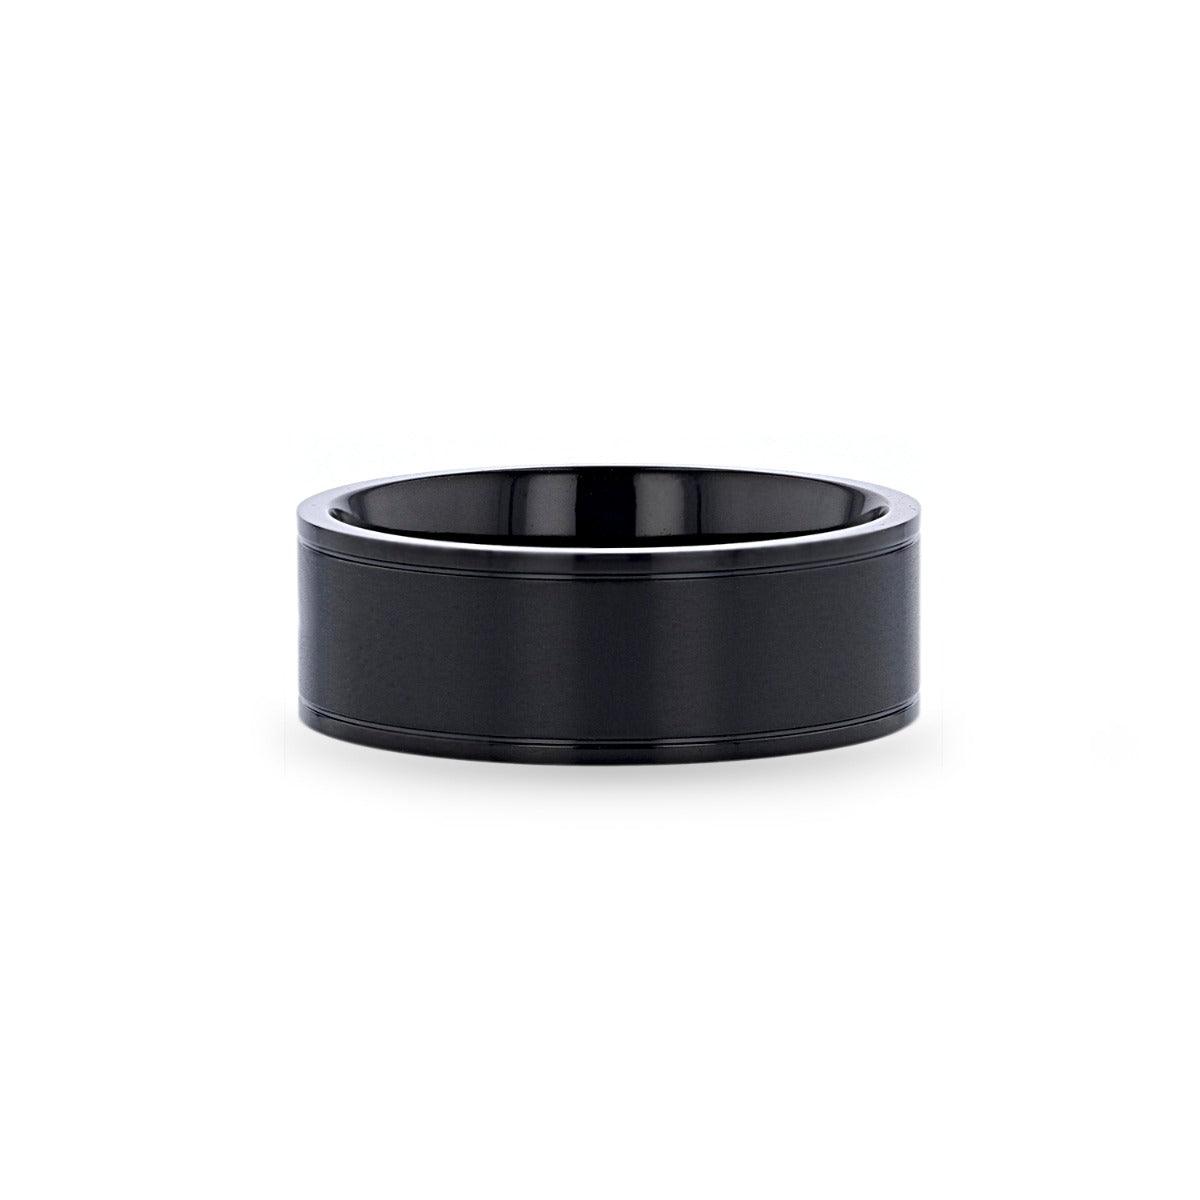 WOLFGANG - Black Titanium Brushed Finish Men’s Wedding Ring with Polished Dual Offset Grooves – 8mm - The Rutile Ltd